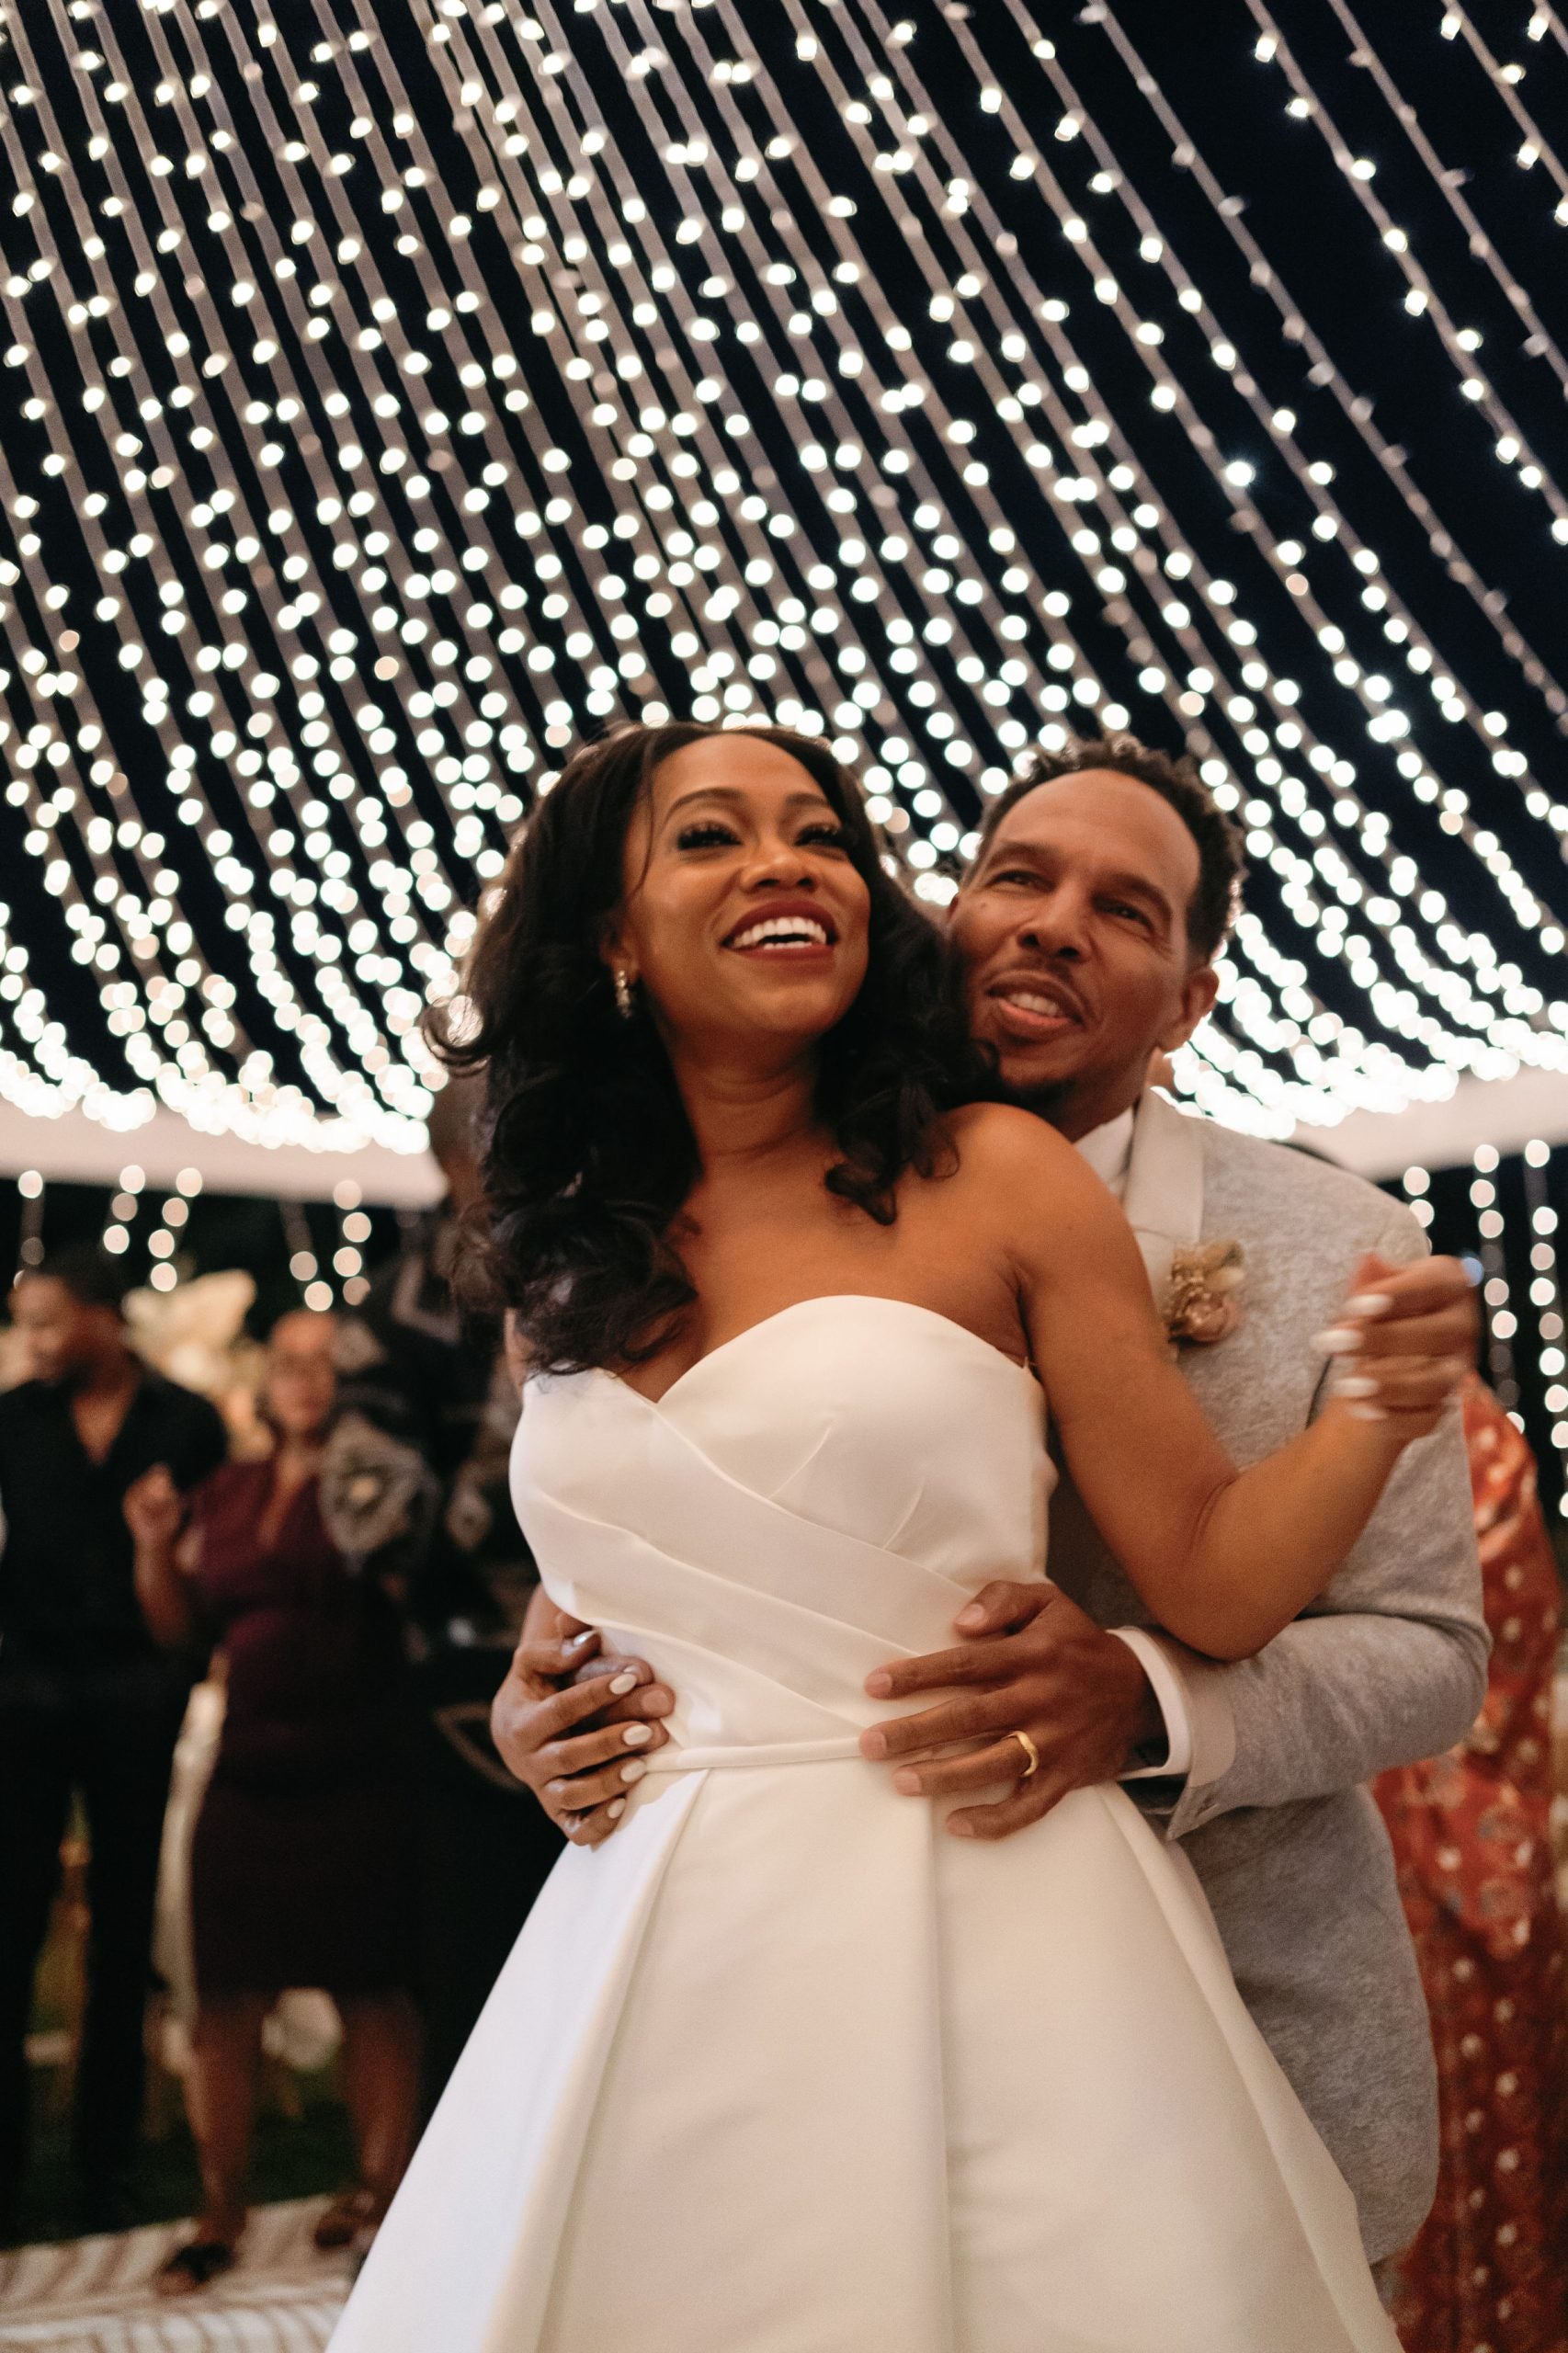 Bridal Bliss: Kendra And Diallobe Said "I Do" In A Magical Celebration In The SoCal Desert